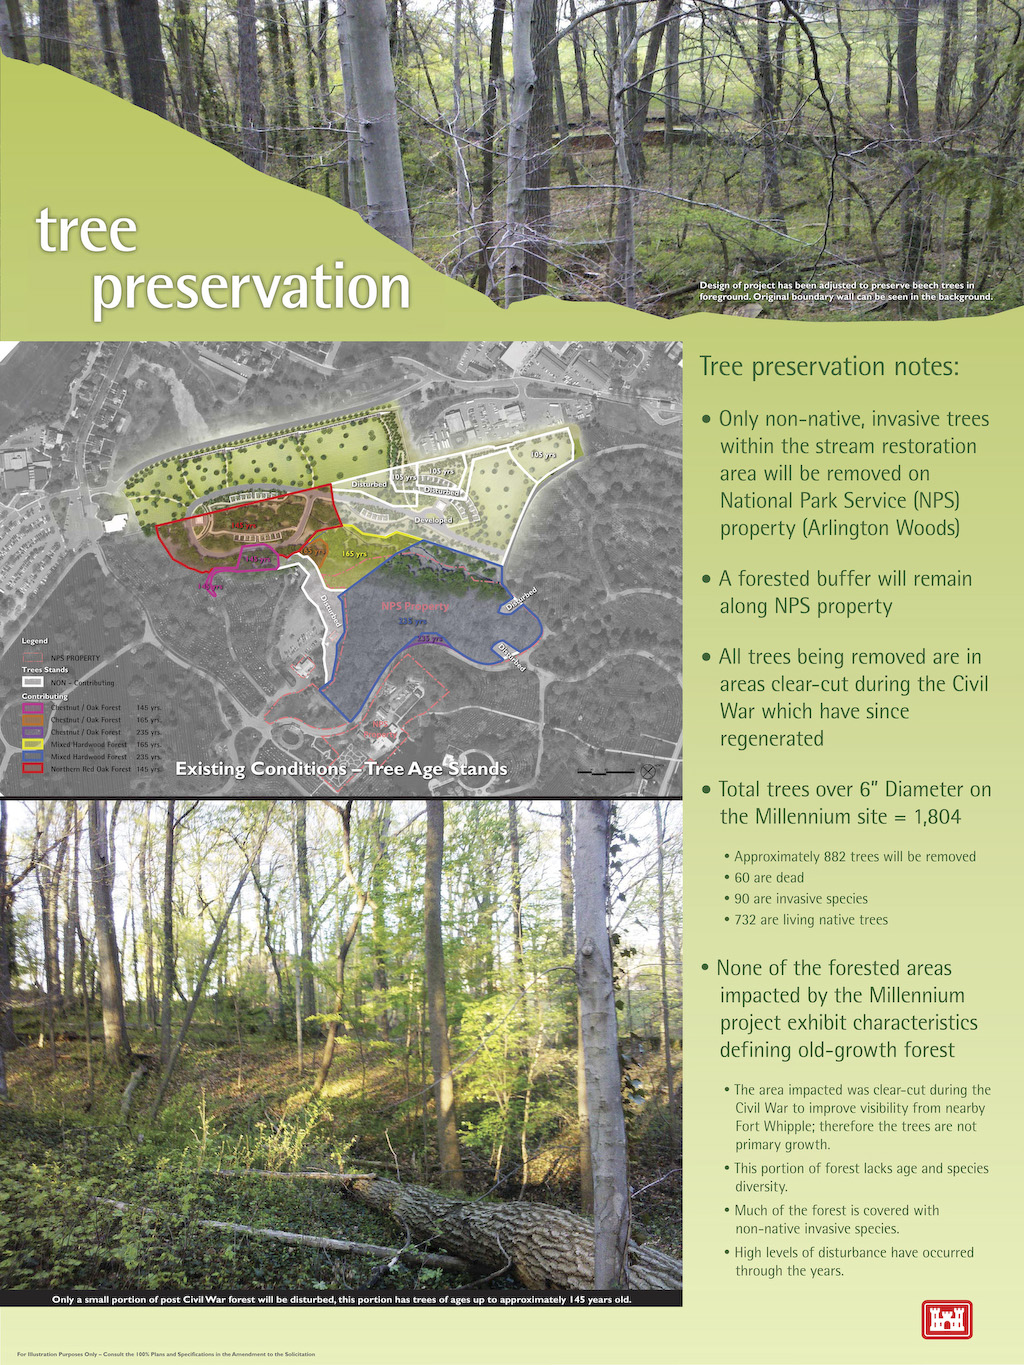 A graphic overview depicting the trees currently located within the boundaries of Arlington National Cemetery's Millennium Project. The project has 1,804 trees, with 6 inches or greater diameter, located on site; 732 living native trees have been identified for removal. 